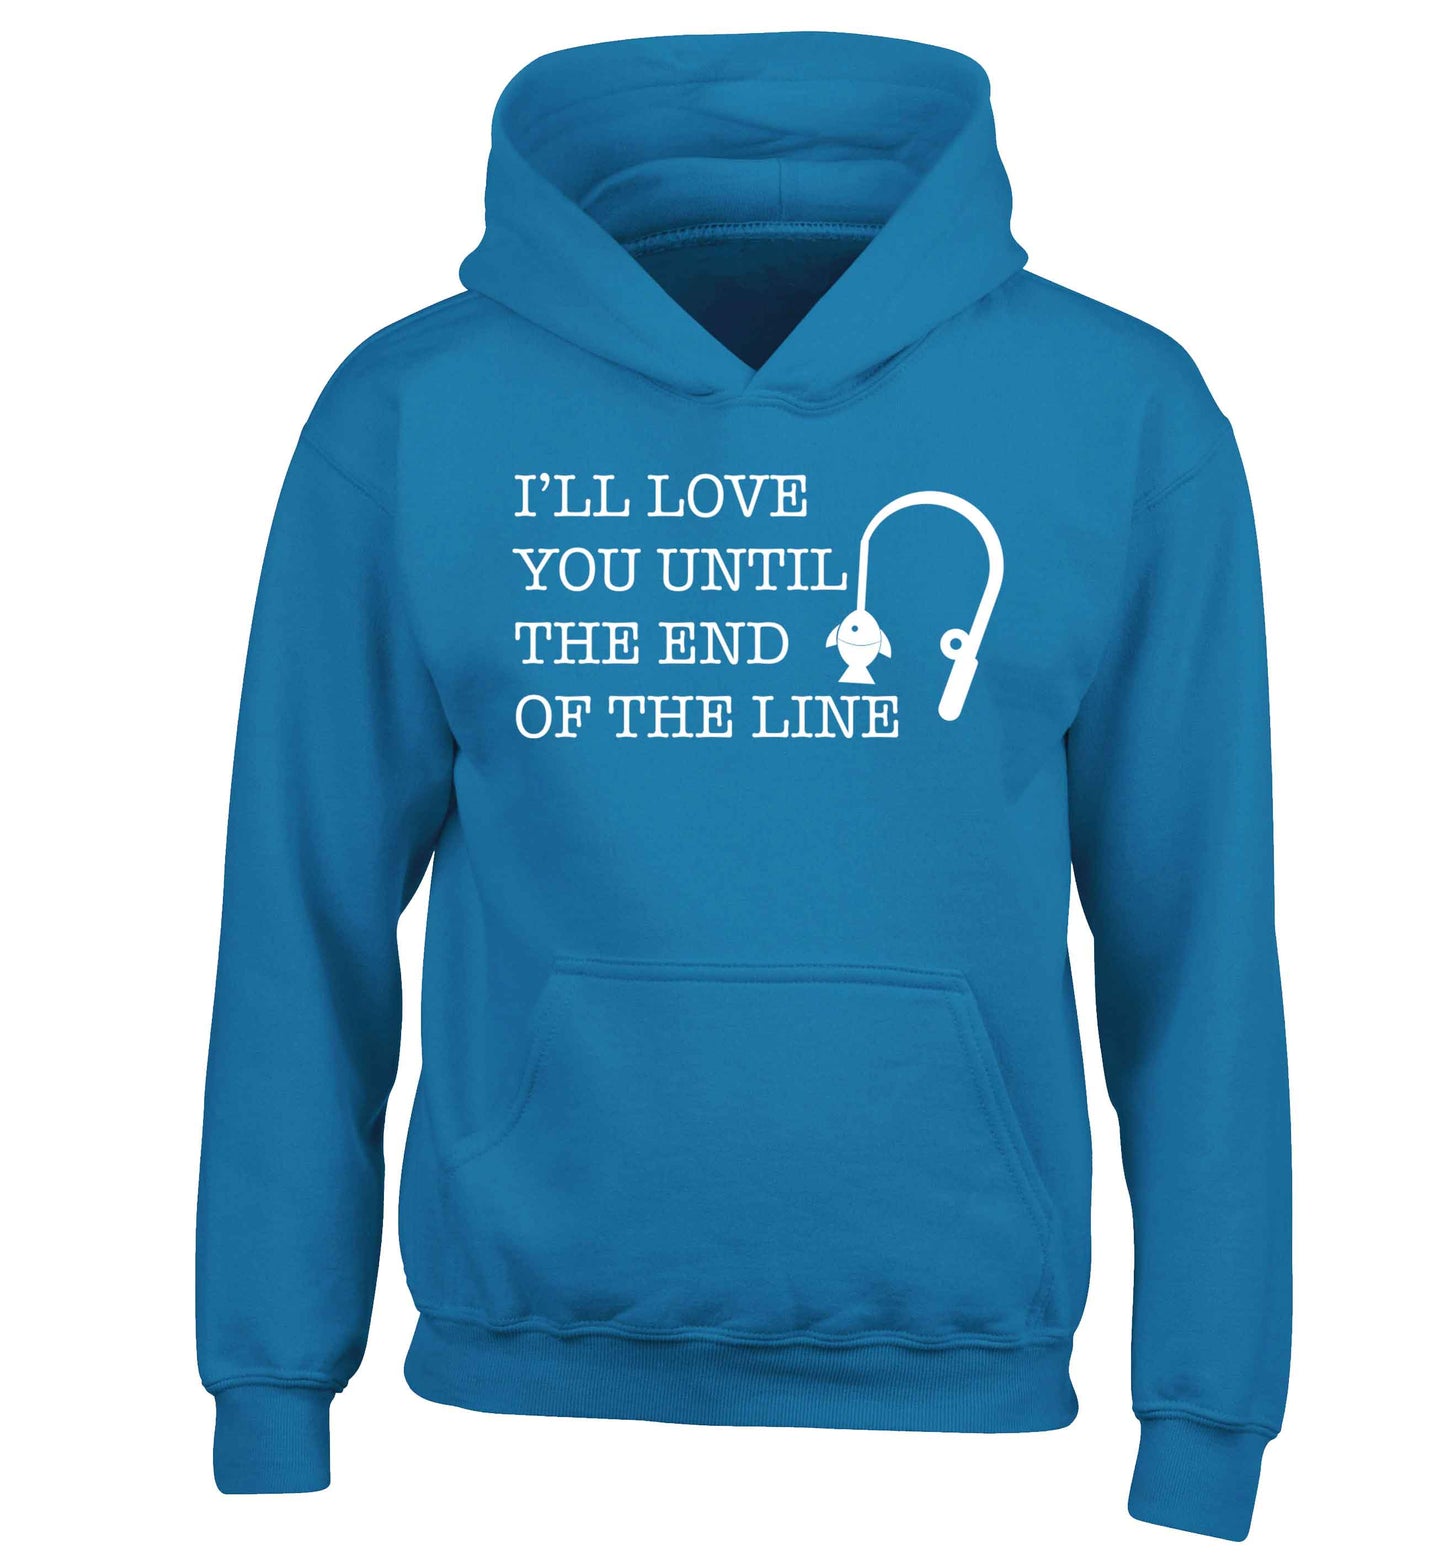 I'll love you until the end of the line children's blue hoodie 12-13 Years